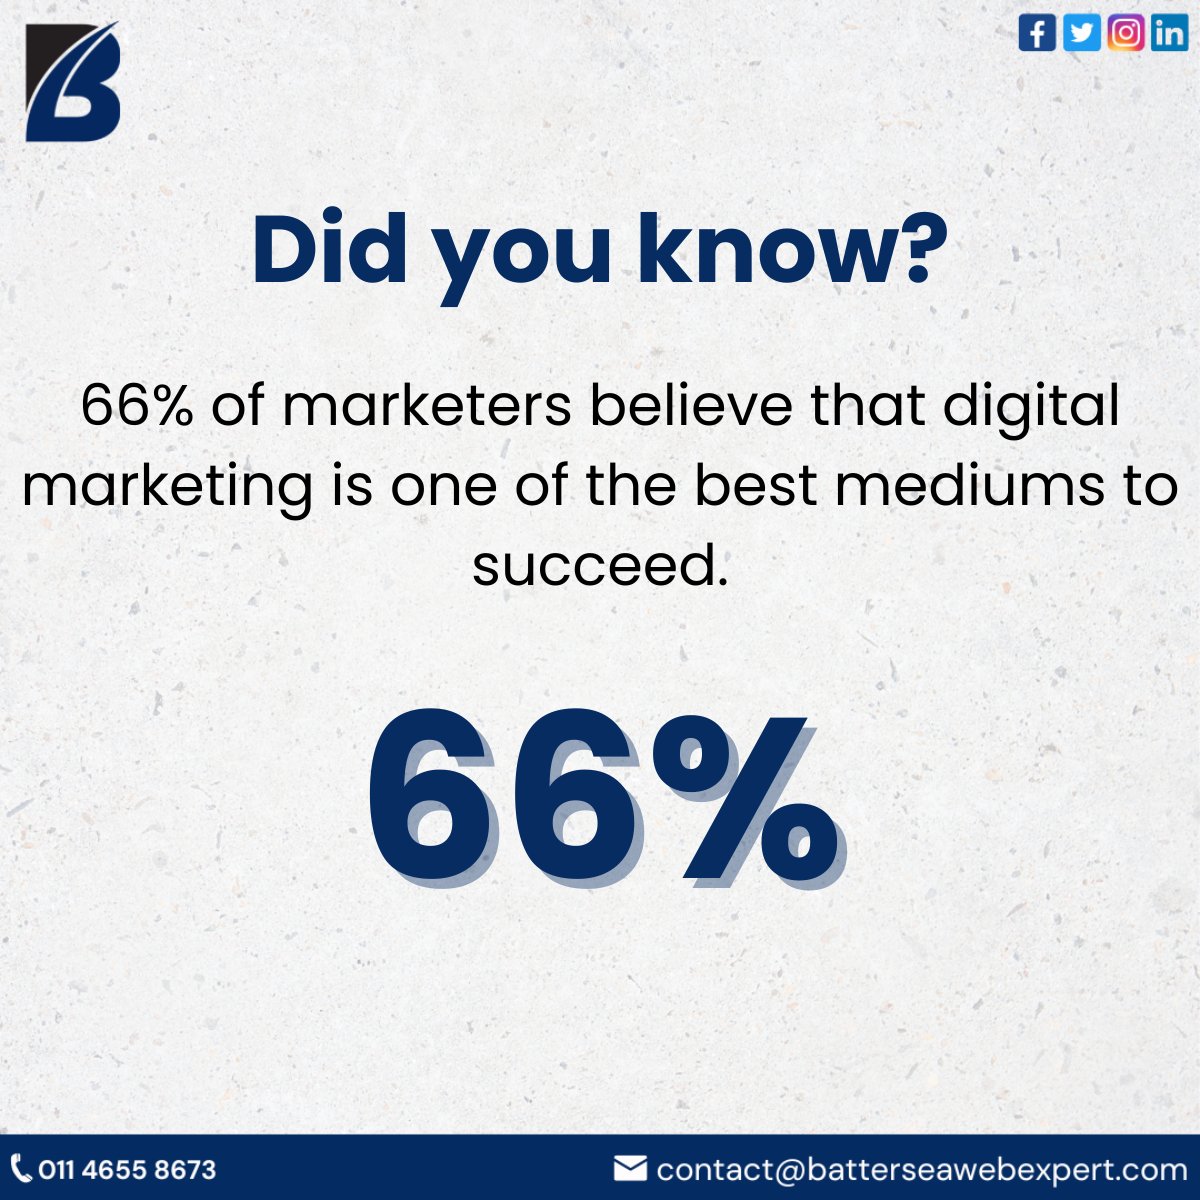 Did you know?

66% of marketers believe that digital marketing is one of the best mediums to succeed.

Follow:- @batterseaweb 

#DigitalMarketing #MarketingSuccess #DigitalStrategy #OnlineAdvertising #SocialMediaMarketing #DigitalCampaigns #DigitalSuccess #DigitalBrand